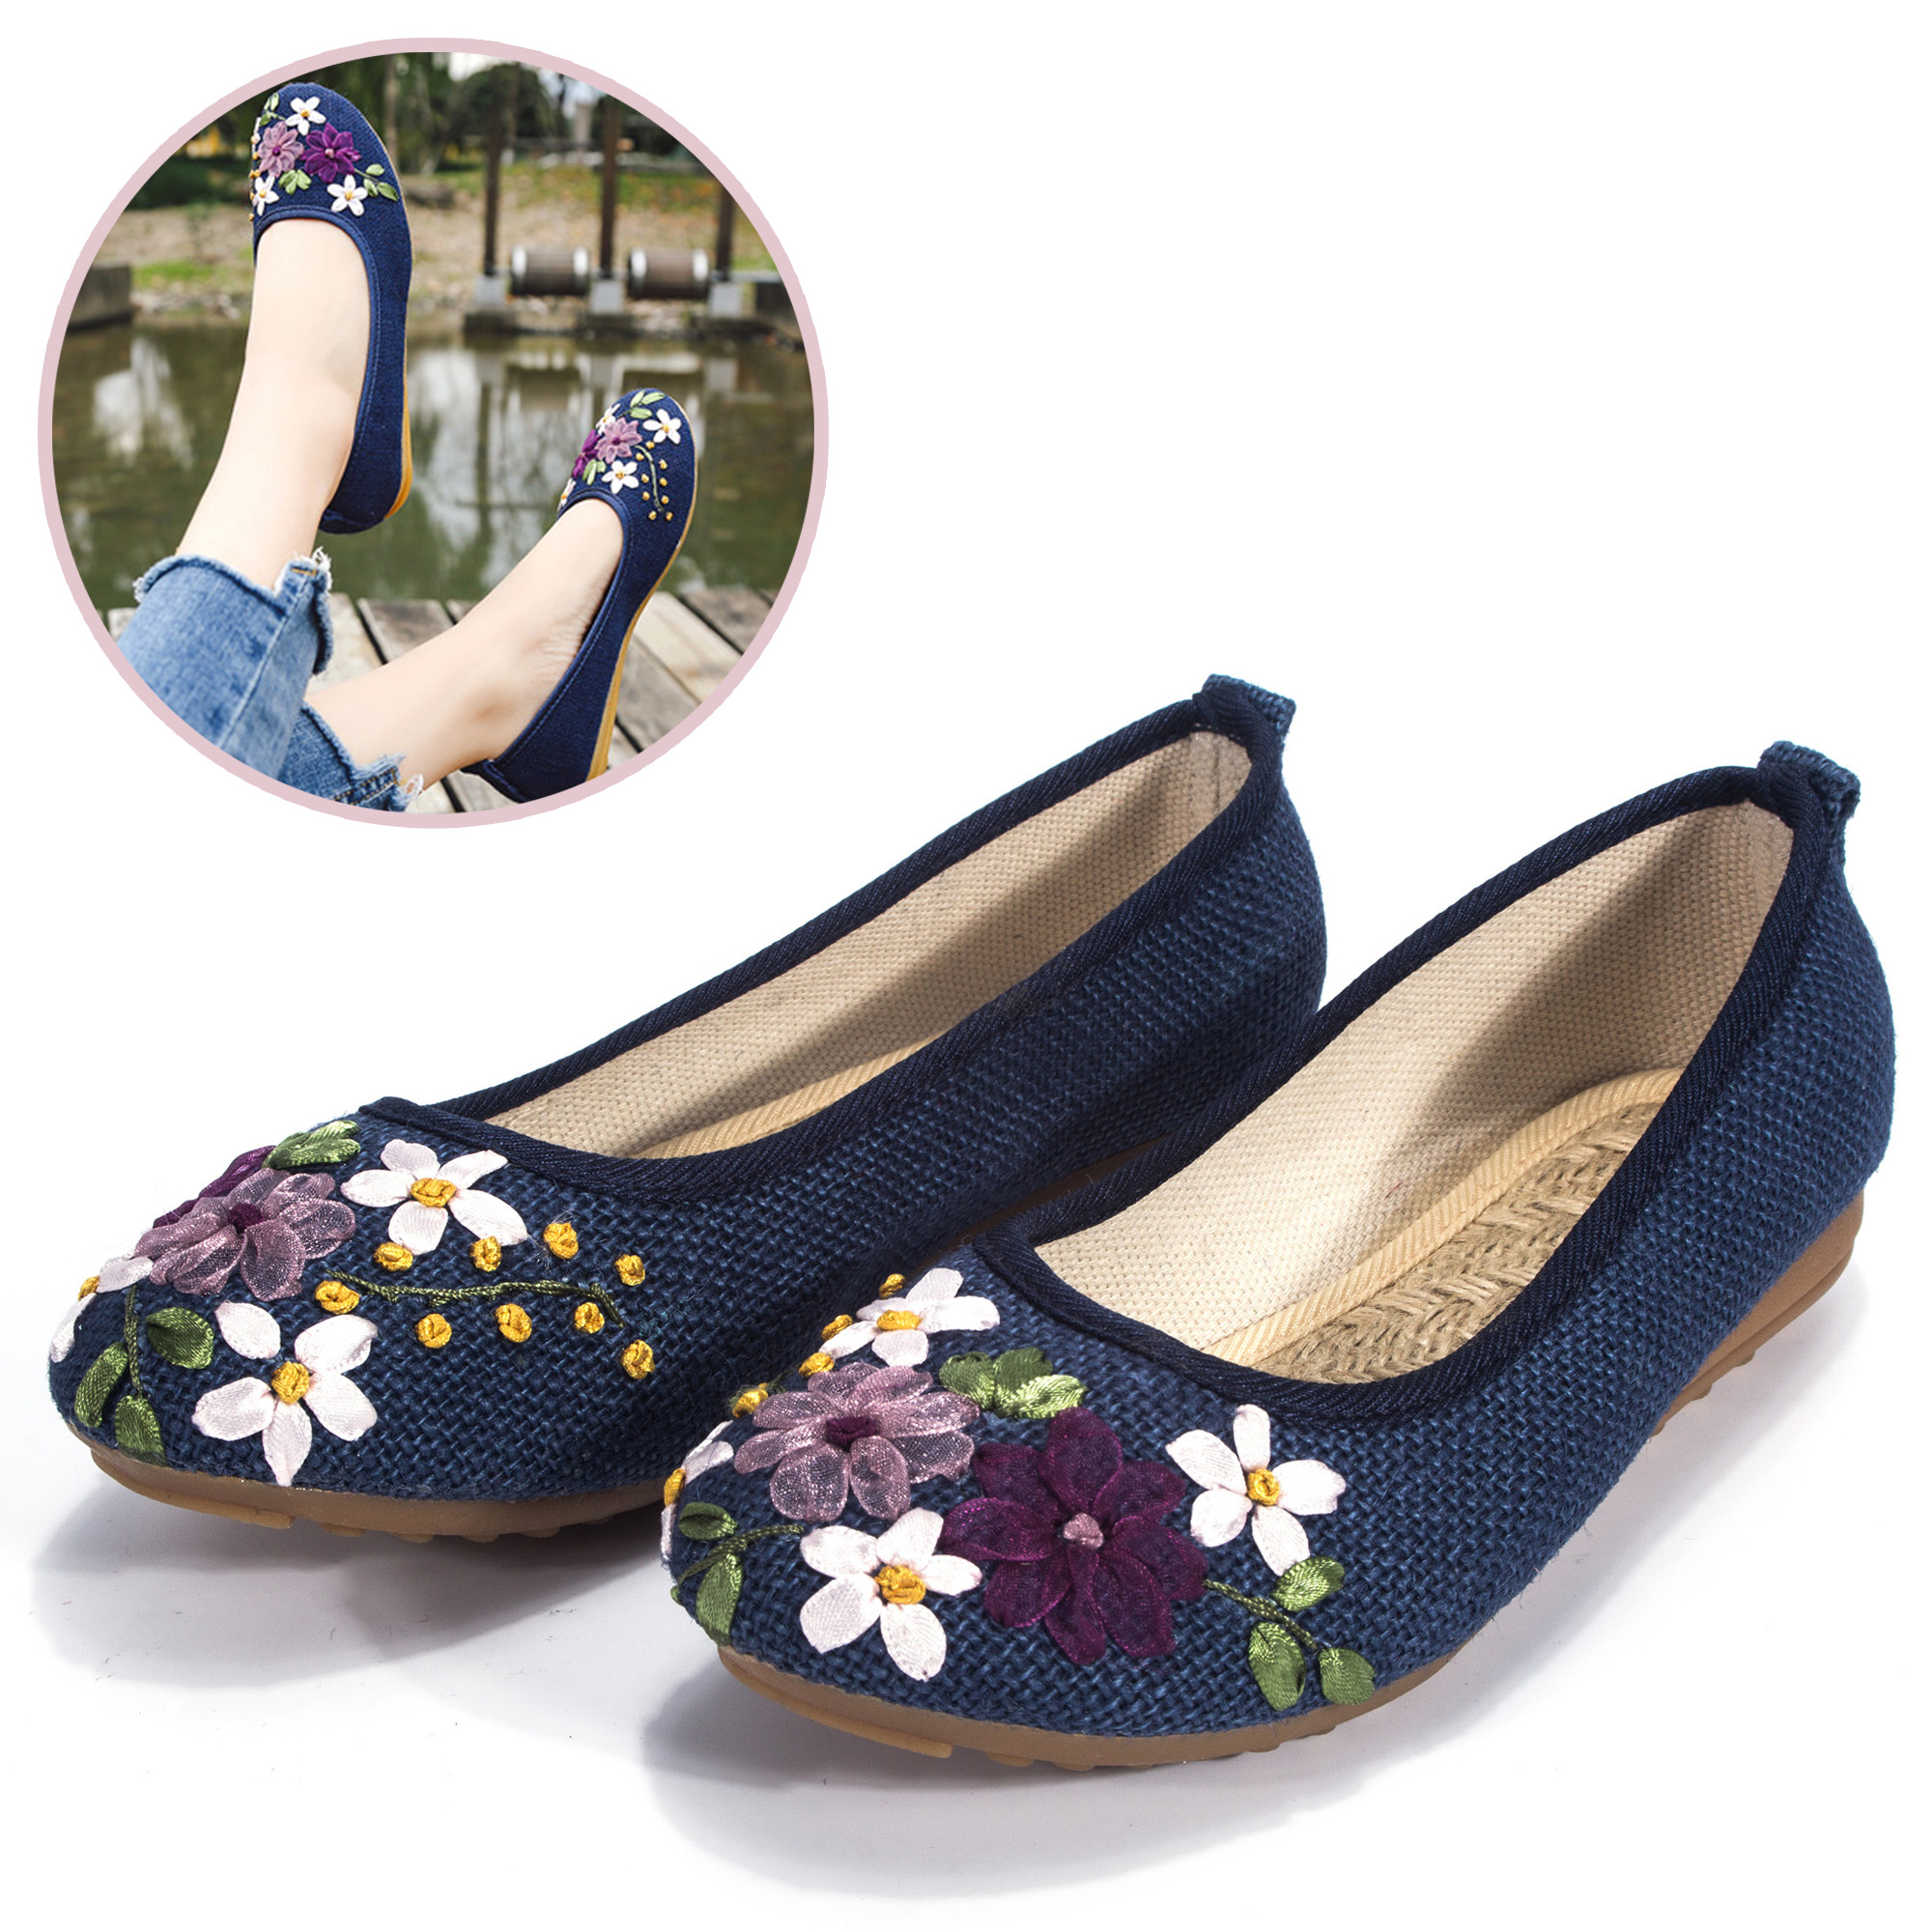 DODOING Women's Casual Fit Flat Office Shoes Non-Slip Flat Walking Shoes with Delicate Embroidery Flower Slip On Flats Shoes Round Toe Ballet Flats (4-10 Size)-Navy Blue - image 1 of 7